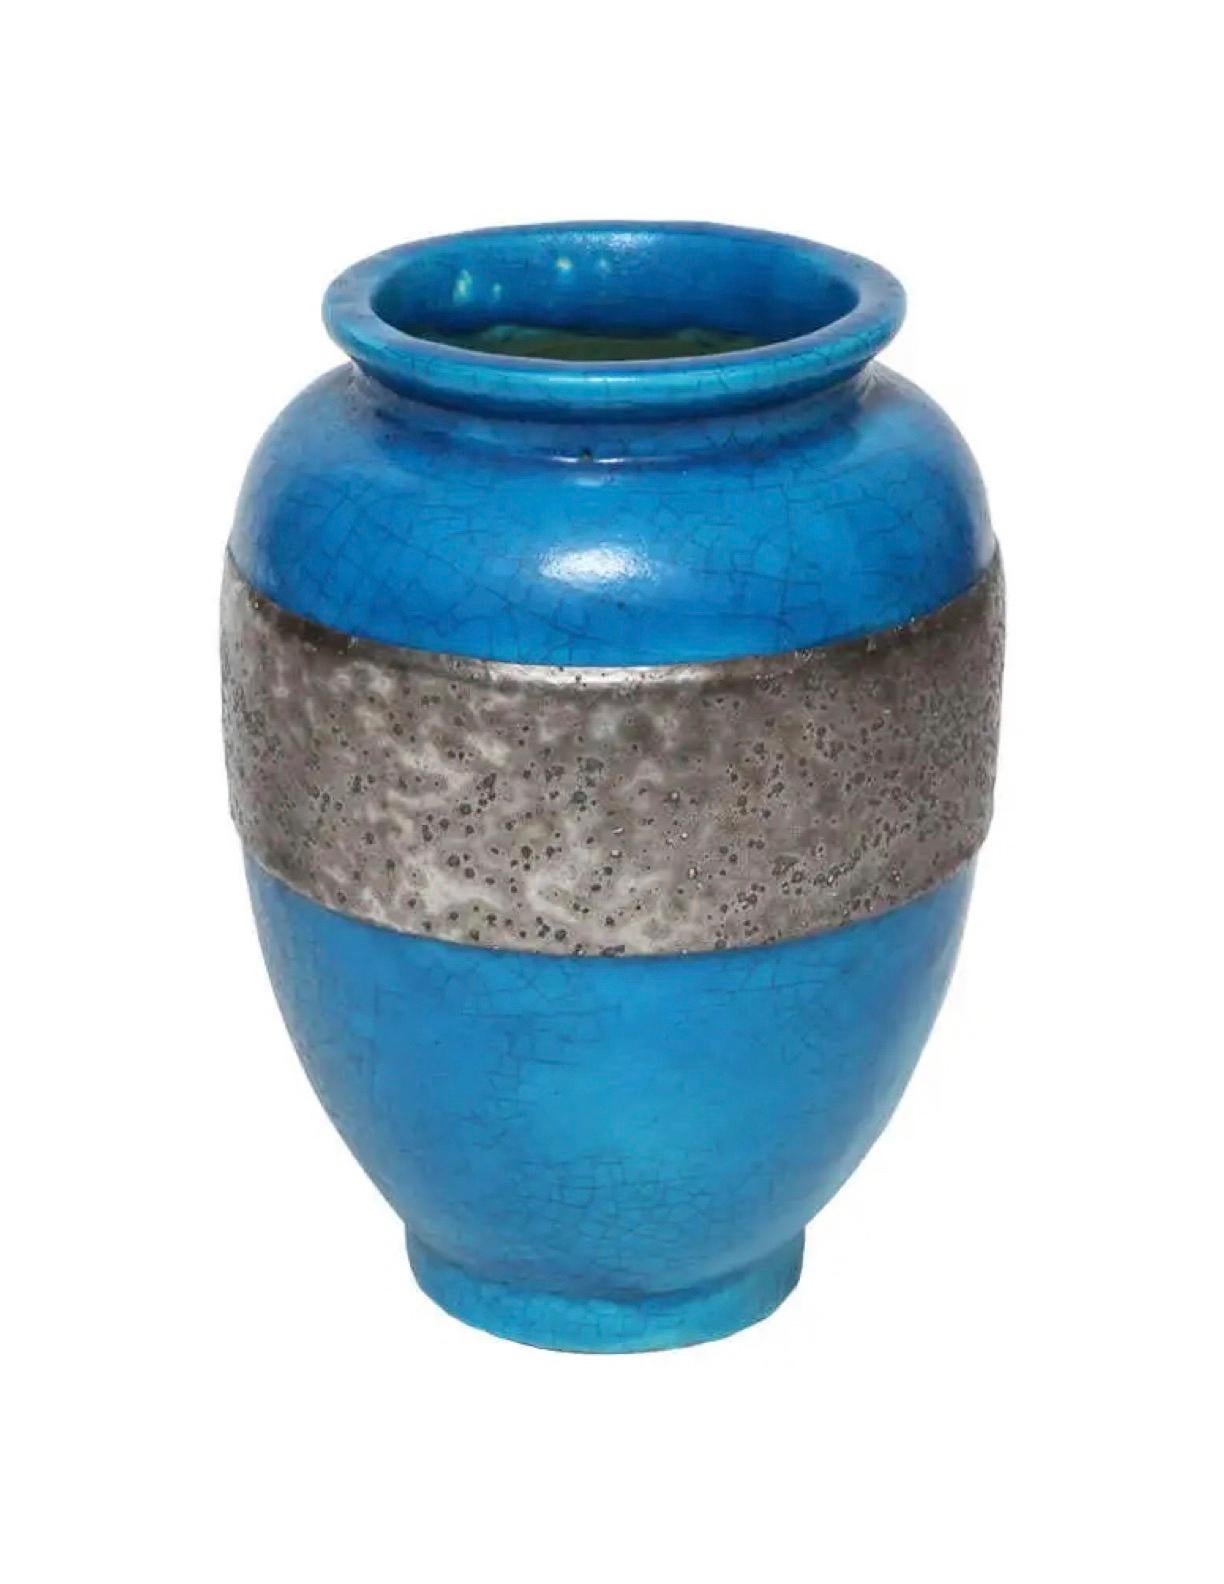 Modern Raoul Lachenal Blue Crackle Glaze Ceramic Vase with Band, circa 1930s - 1940s For Sale